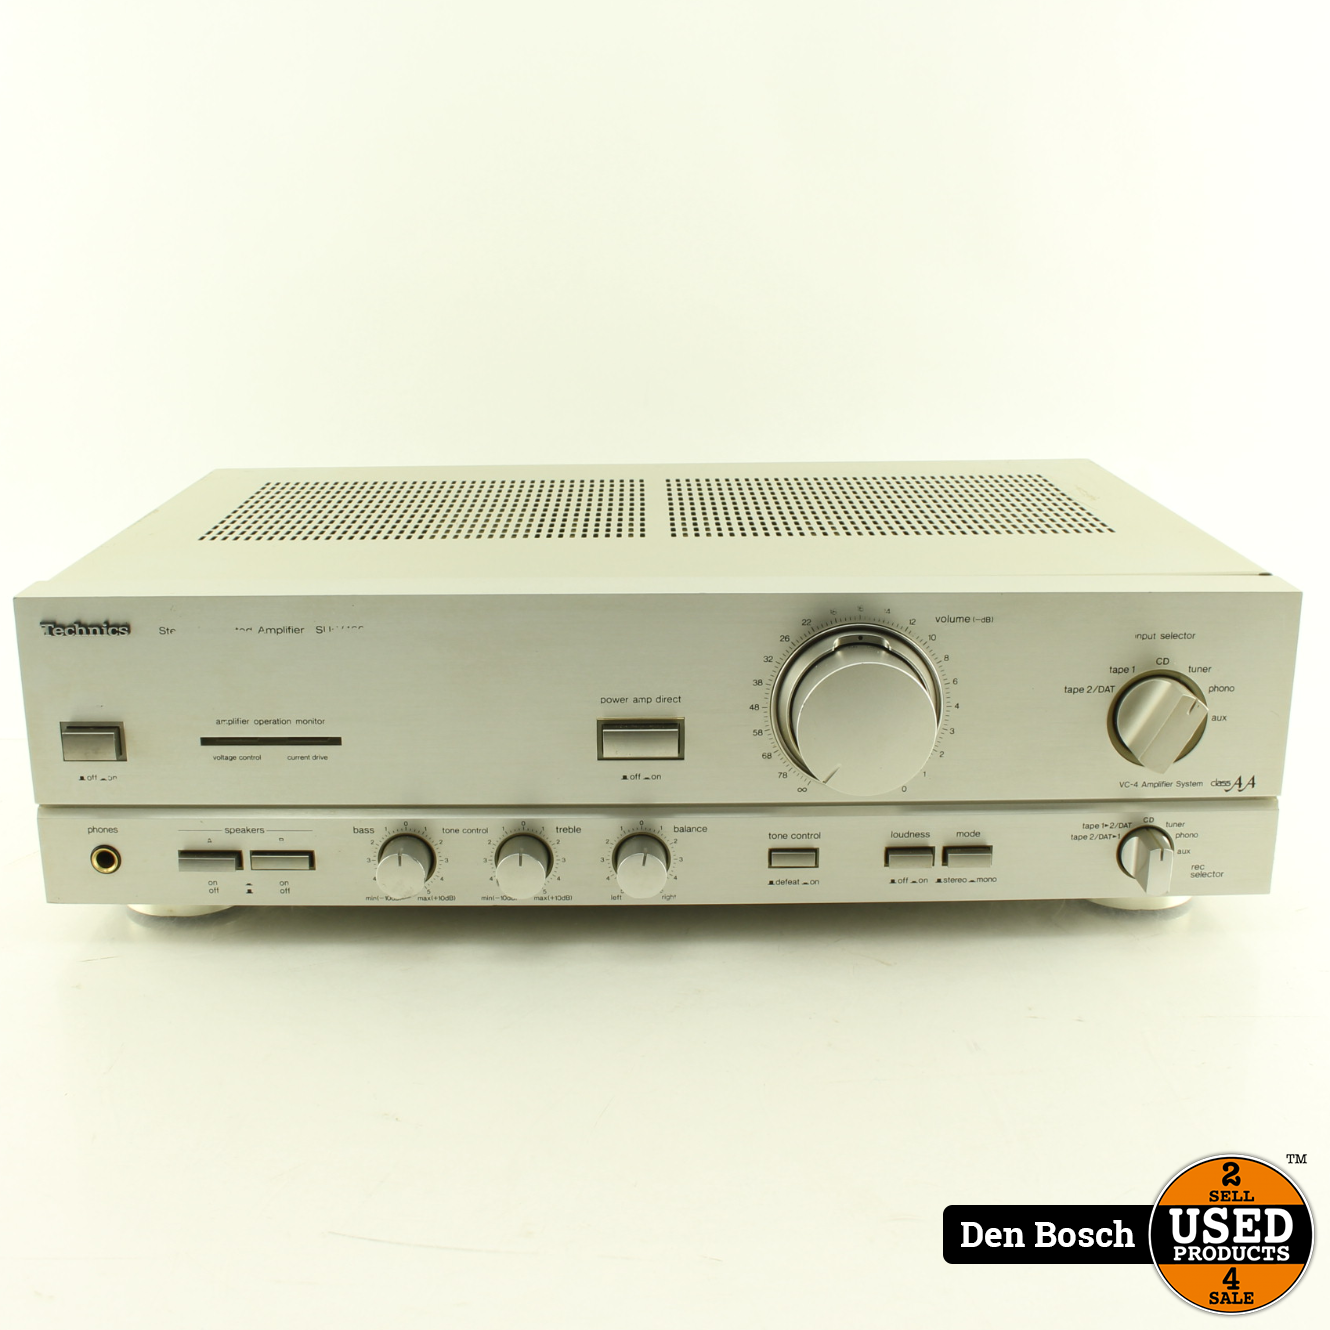 Subsidie Incubus bioscoop Technics SU v460 Stereo Versterker - Used Products Den Bosch